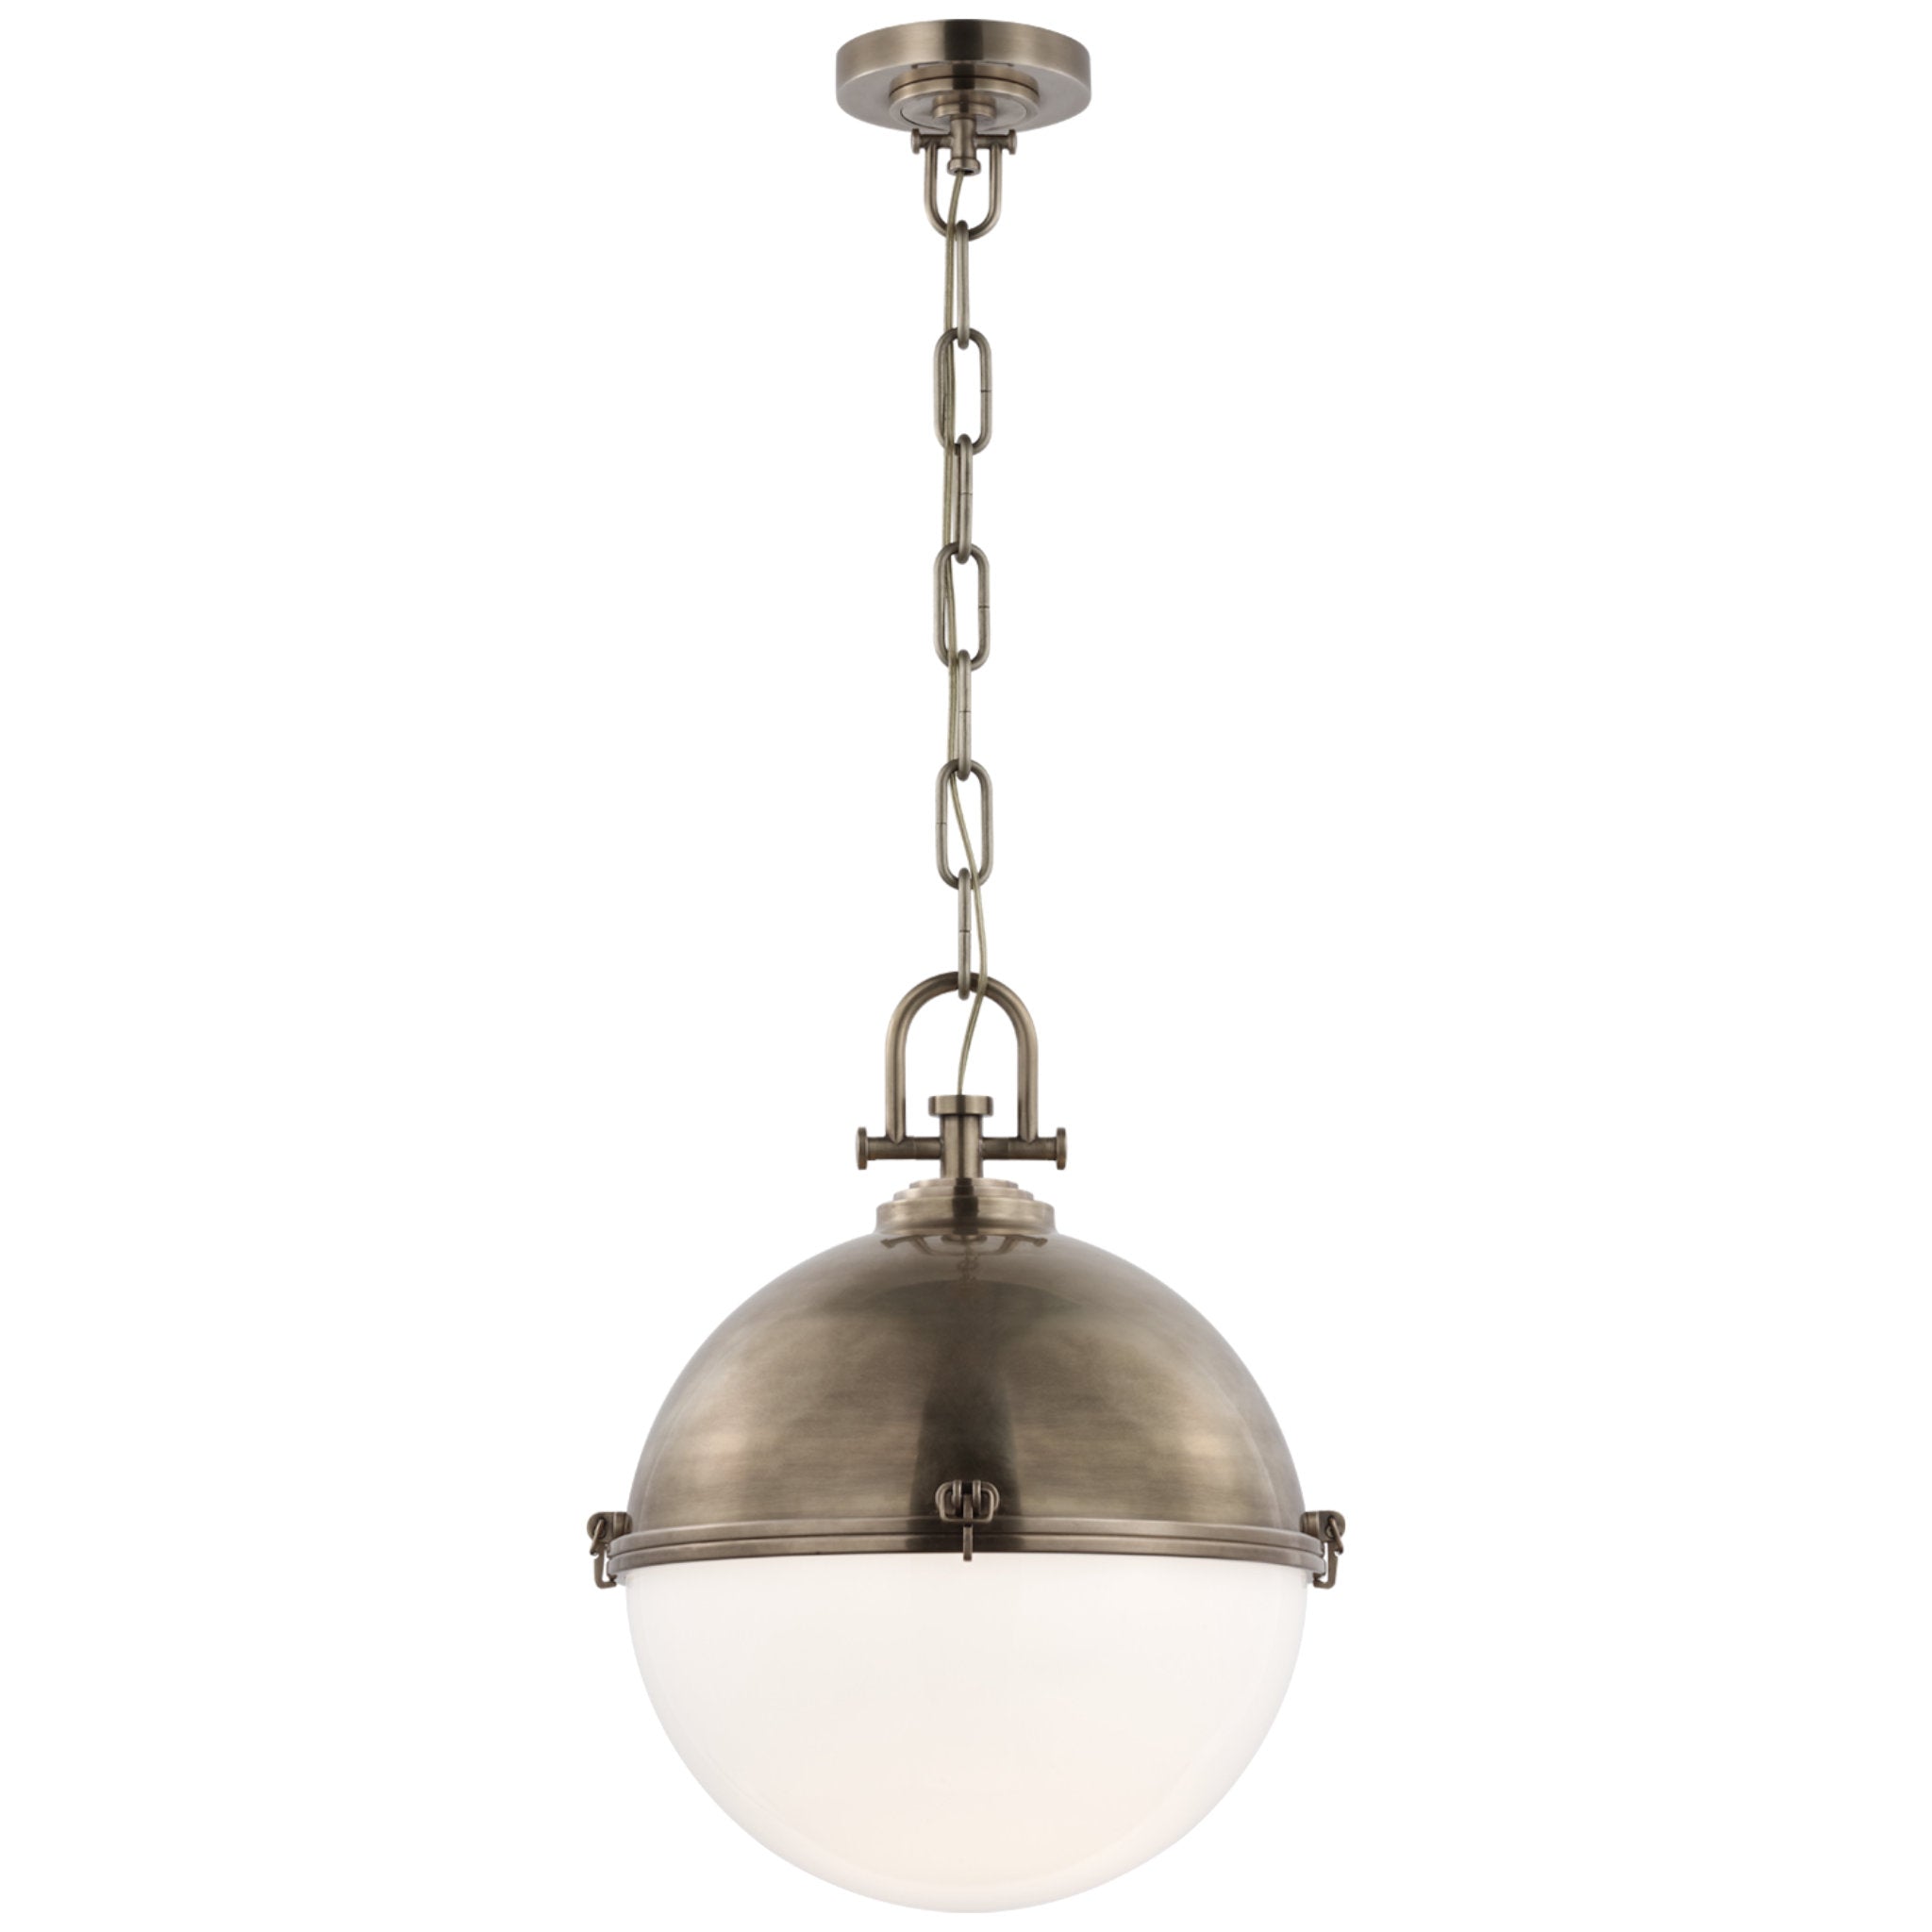 Chapman & Myers Adrian X-Large Globe Pendant in Antique Nickel with White Glass